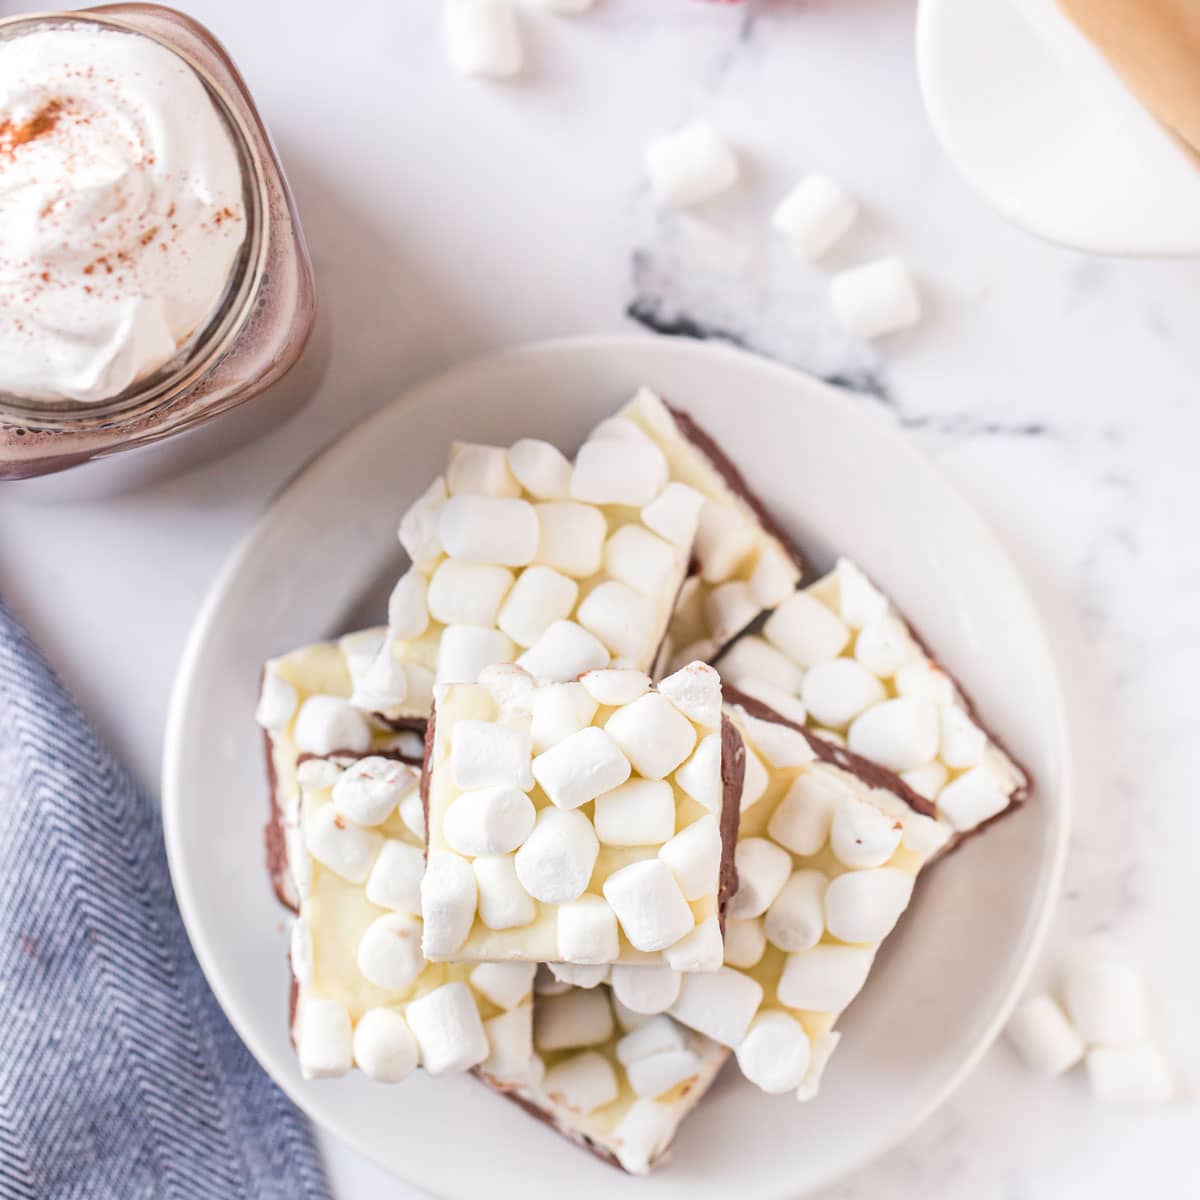 A plate of marshmallow-covered fudge with glass of hot chocolate.